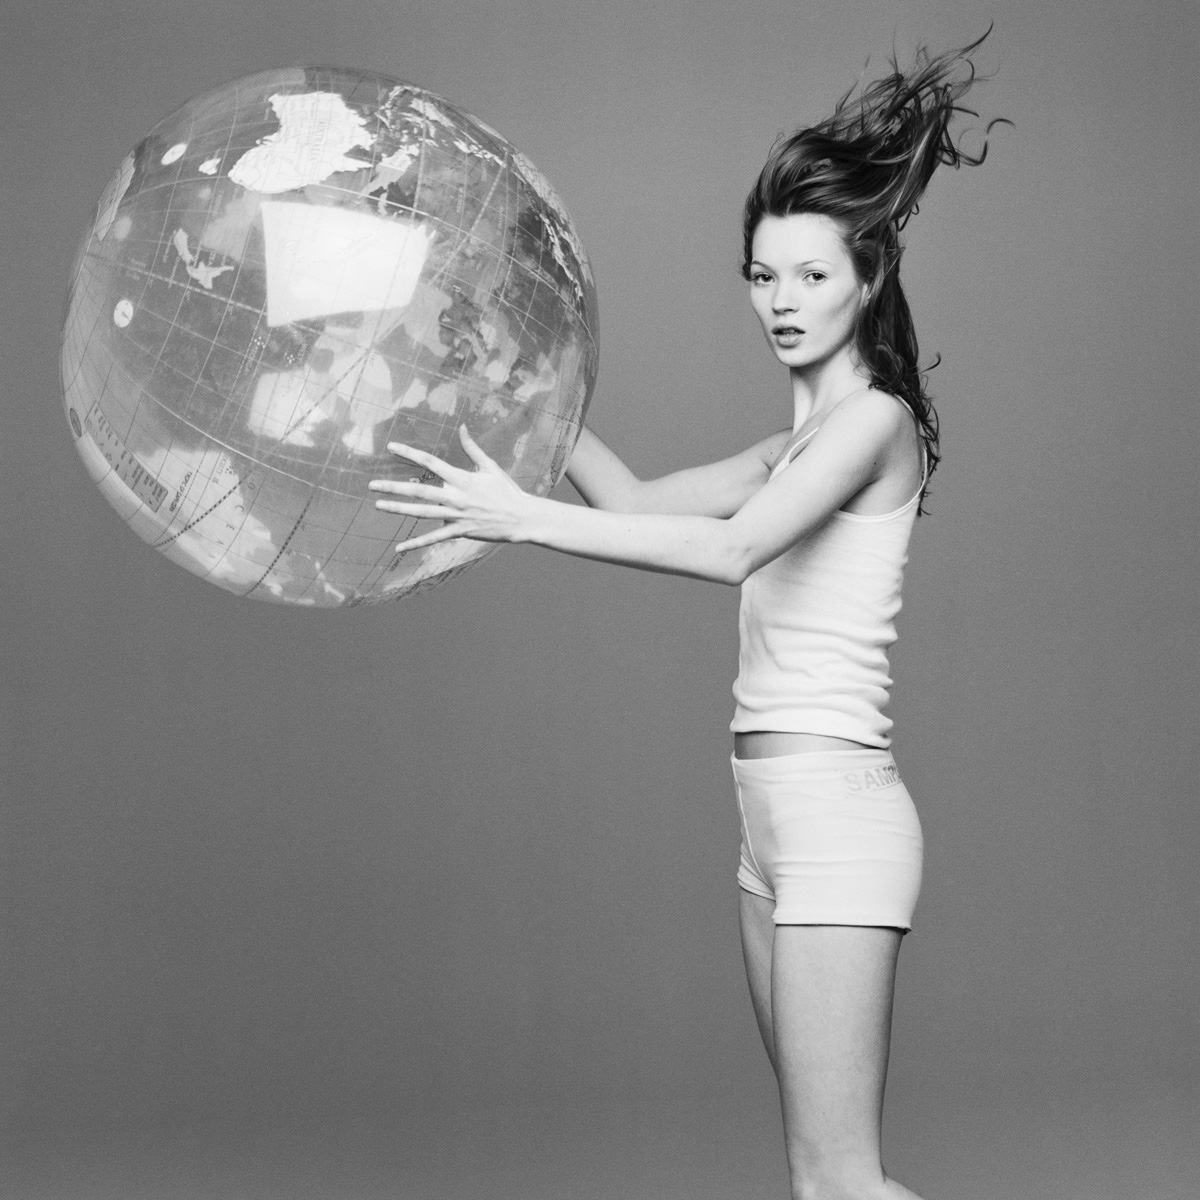 kate+moss+with+the+world+by+patrik+andersson.jpeg